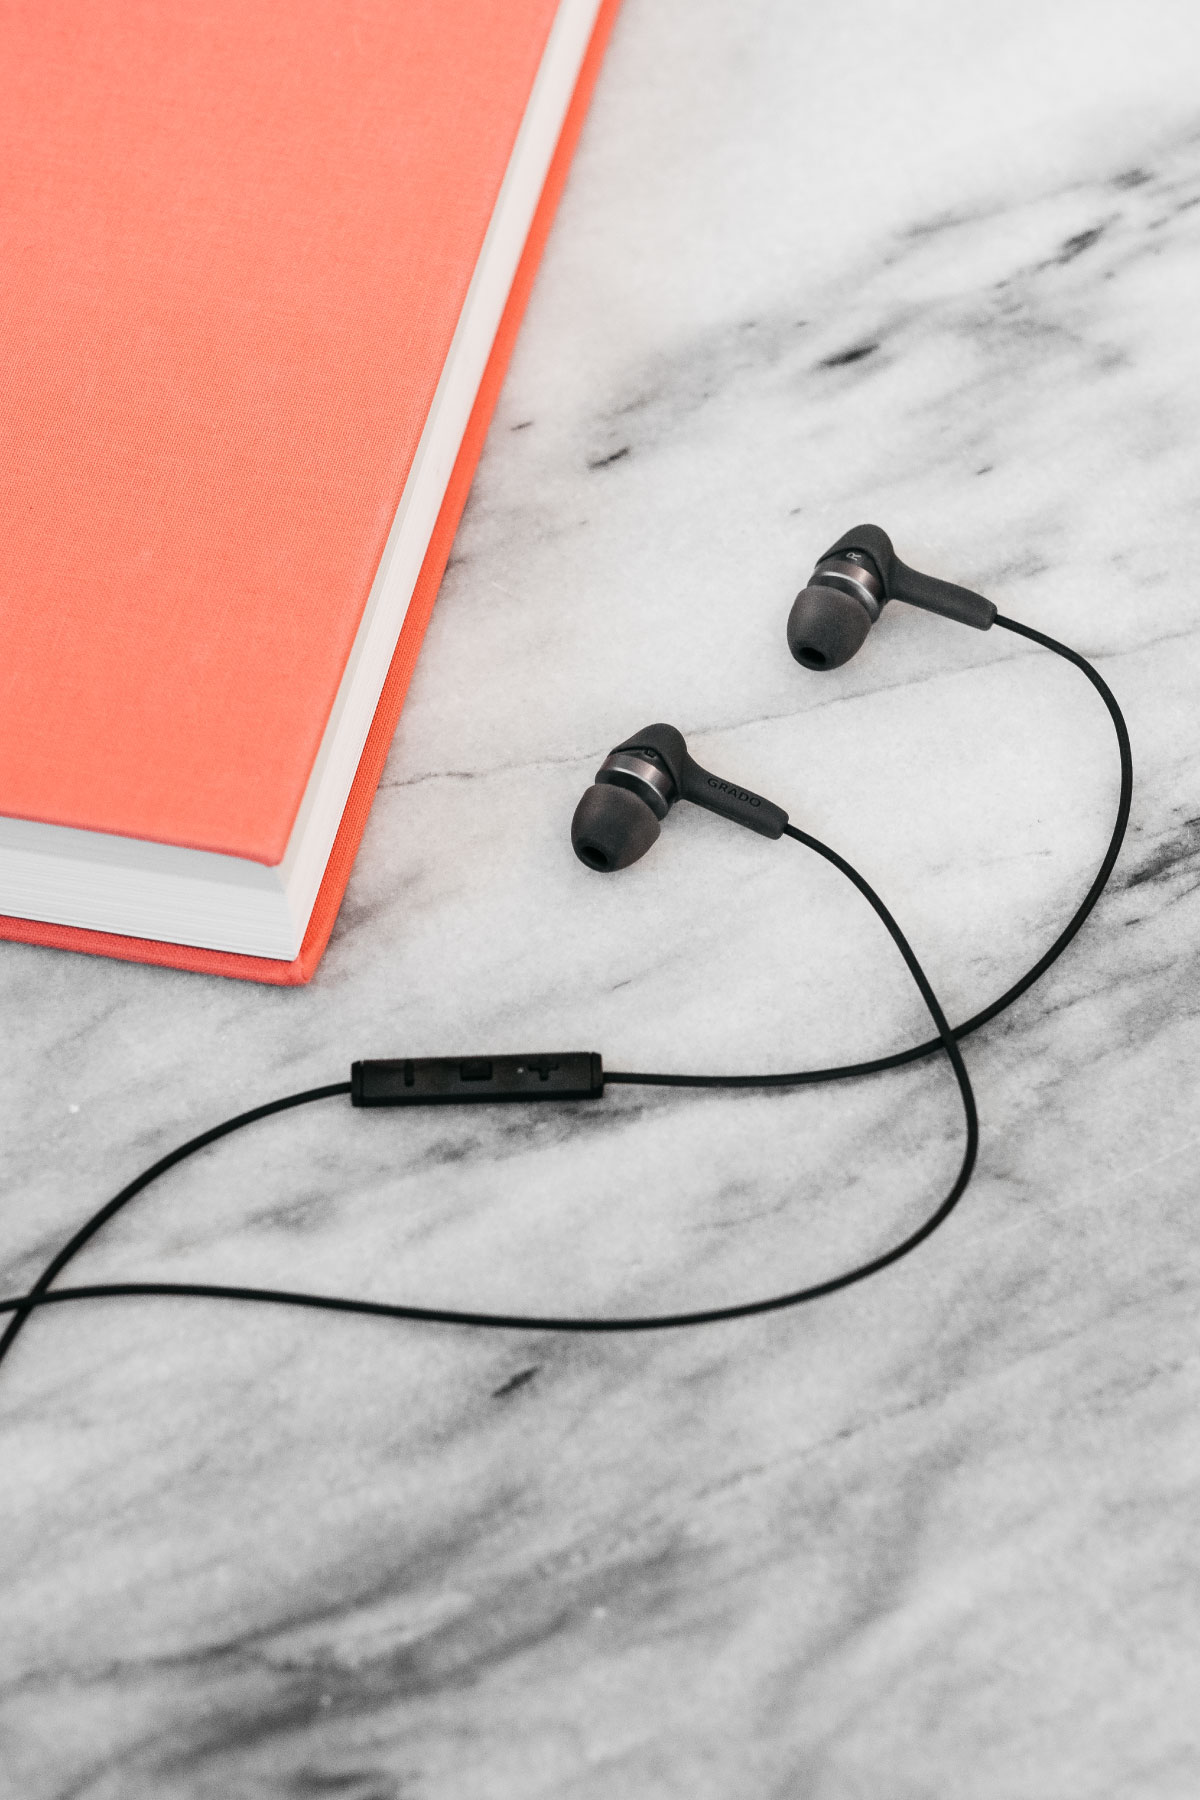 Photo of Grado ige3 headphones laying on a white marble table next to a salmon colored book